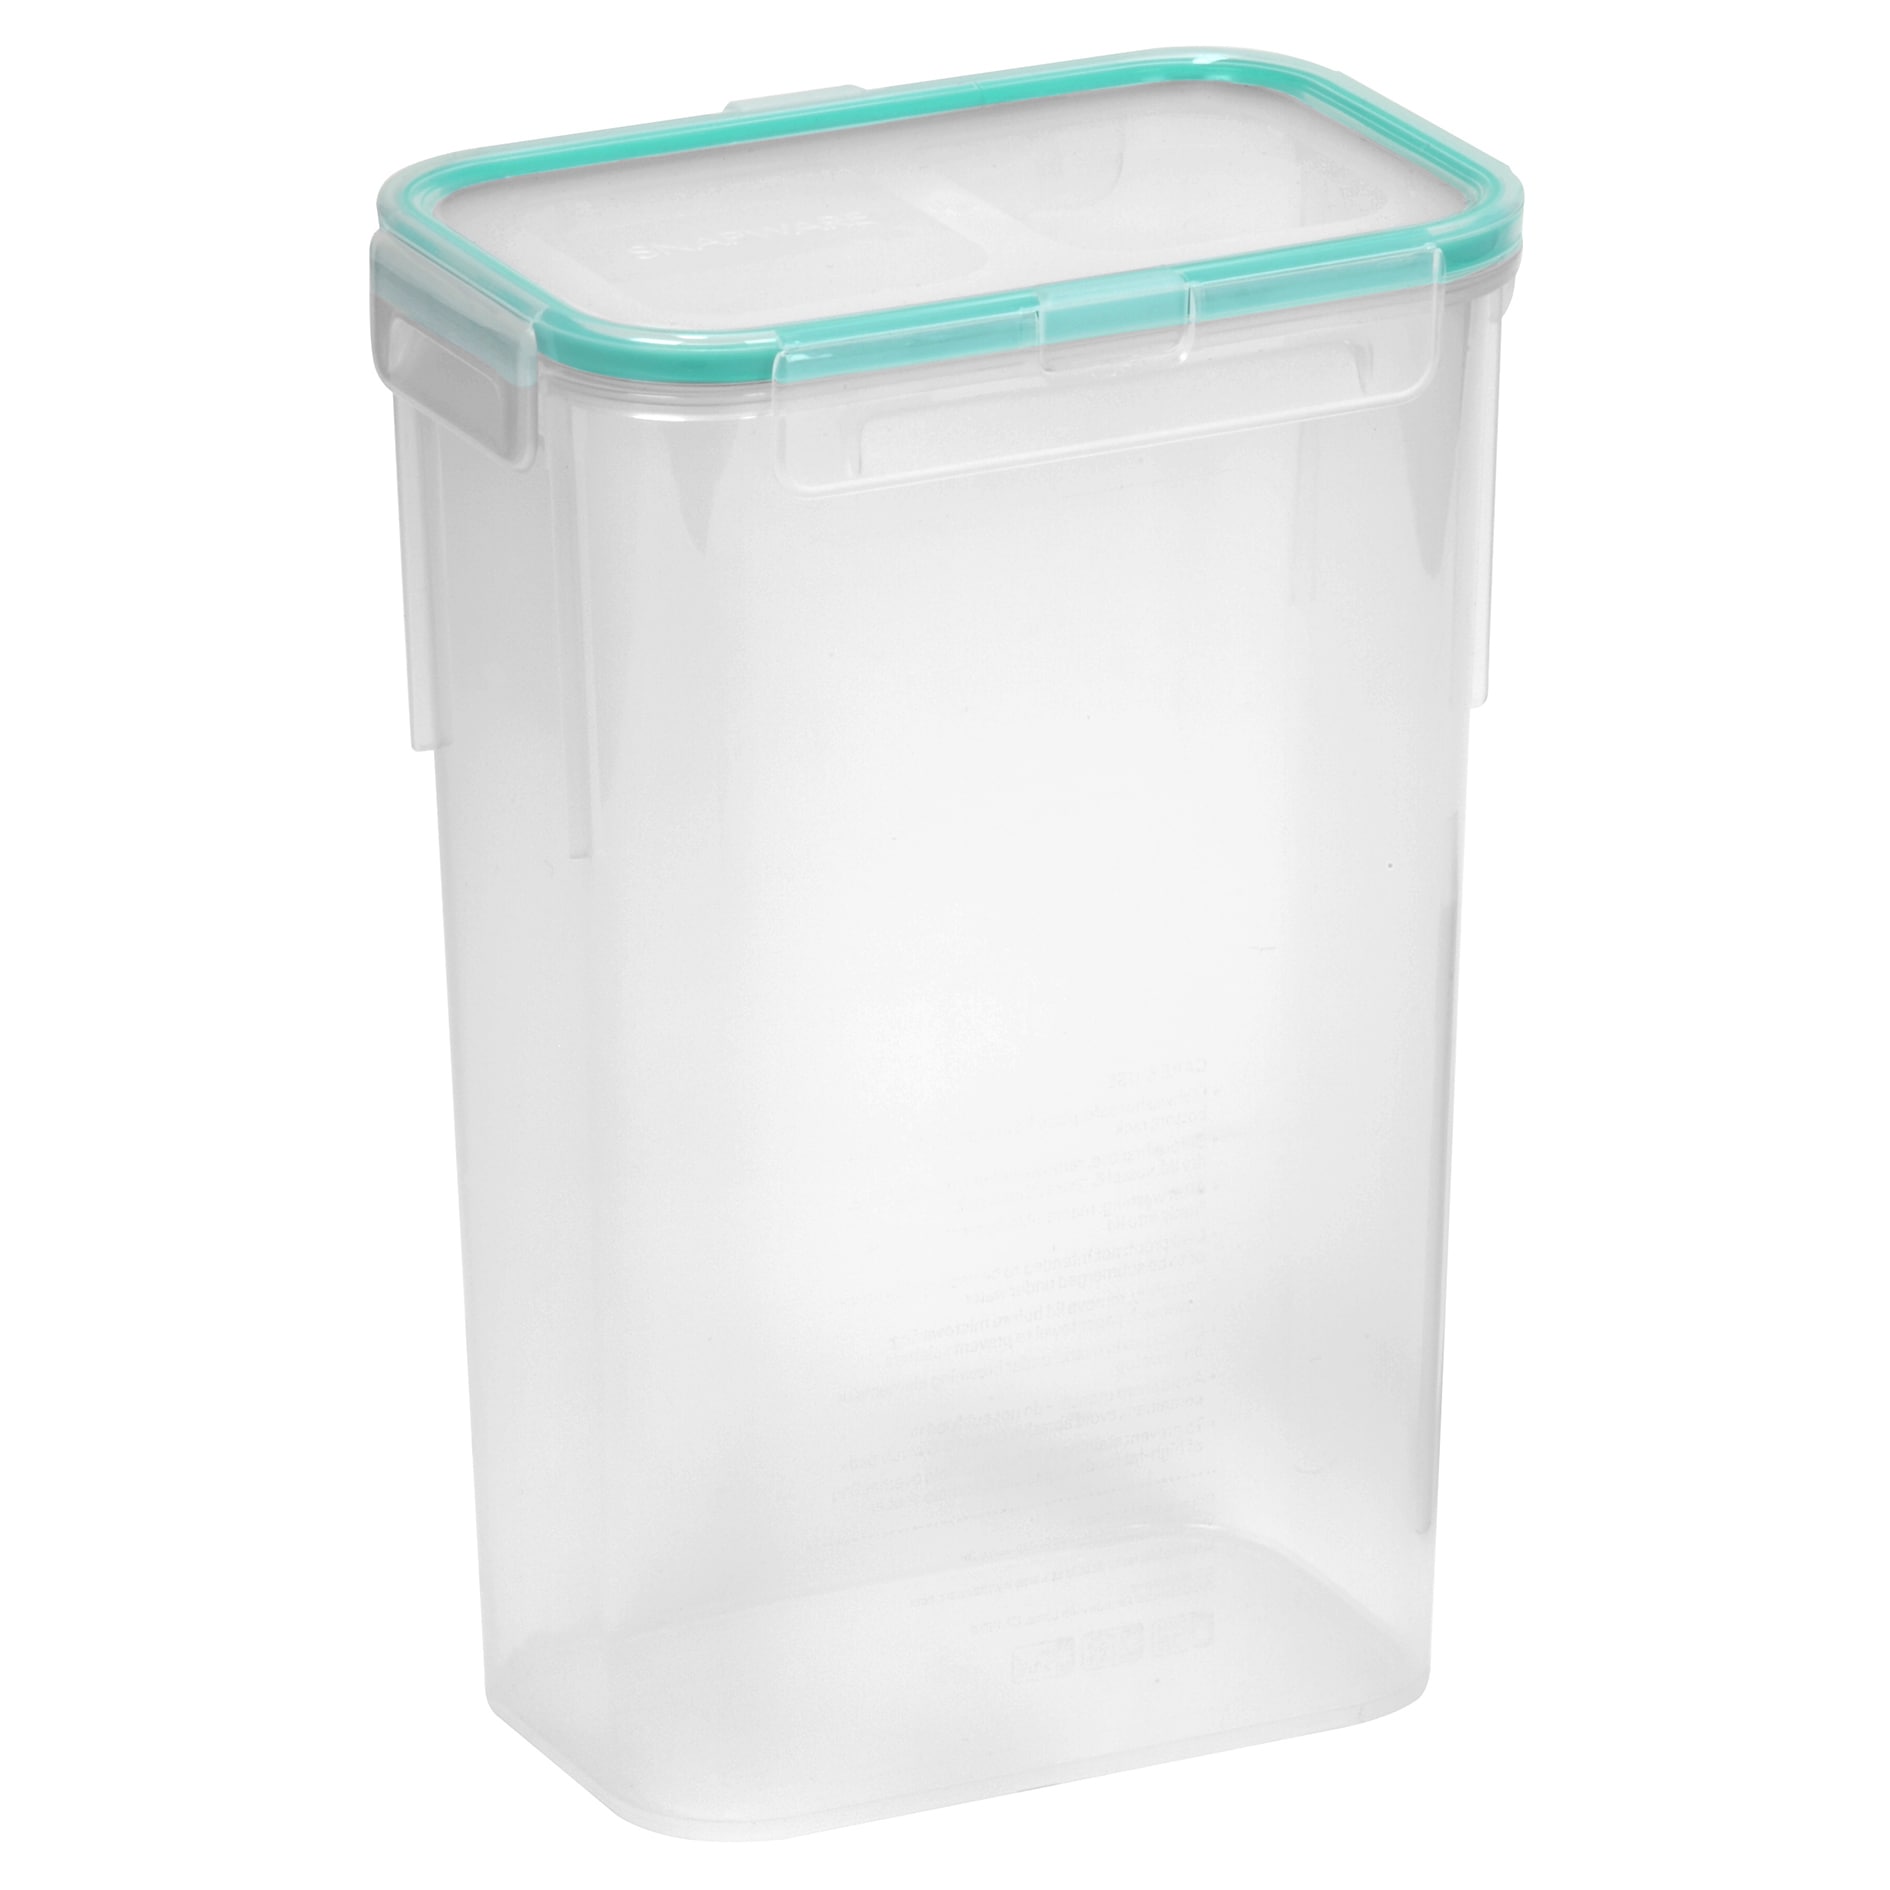 https://ak1.ostkcdn.com/images/products/12557635/Snapware-1098431-10-Cup-Rectangle-Airtight-Food-Storage-Container-e04d4d49-6ece-4d89-8f49-fb55f7615408.jpg